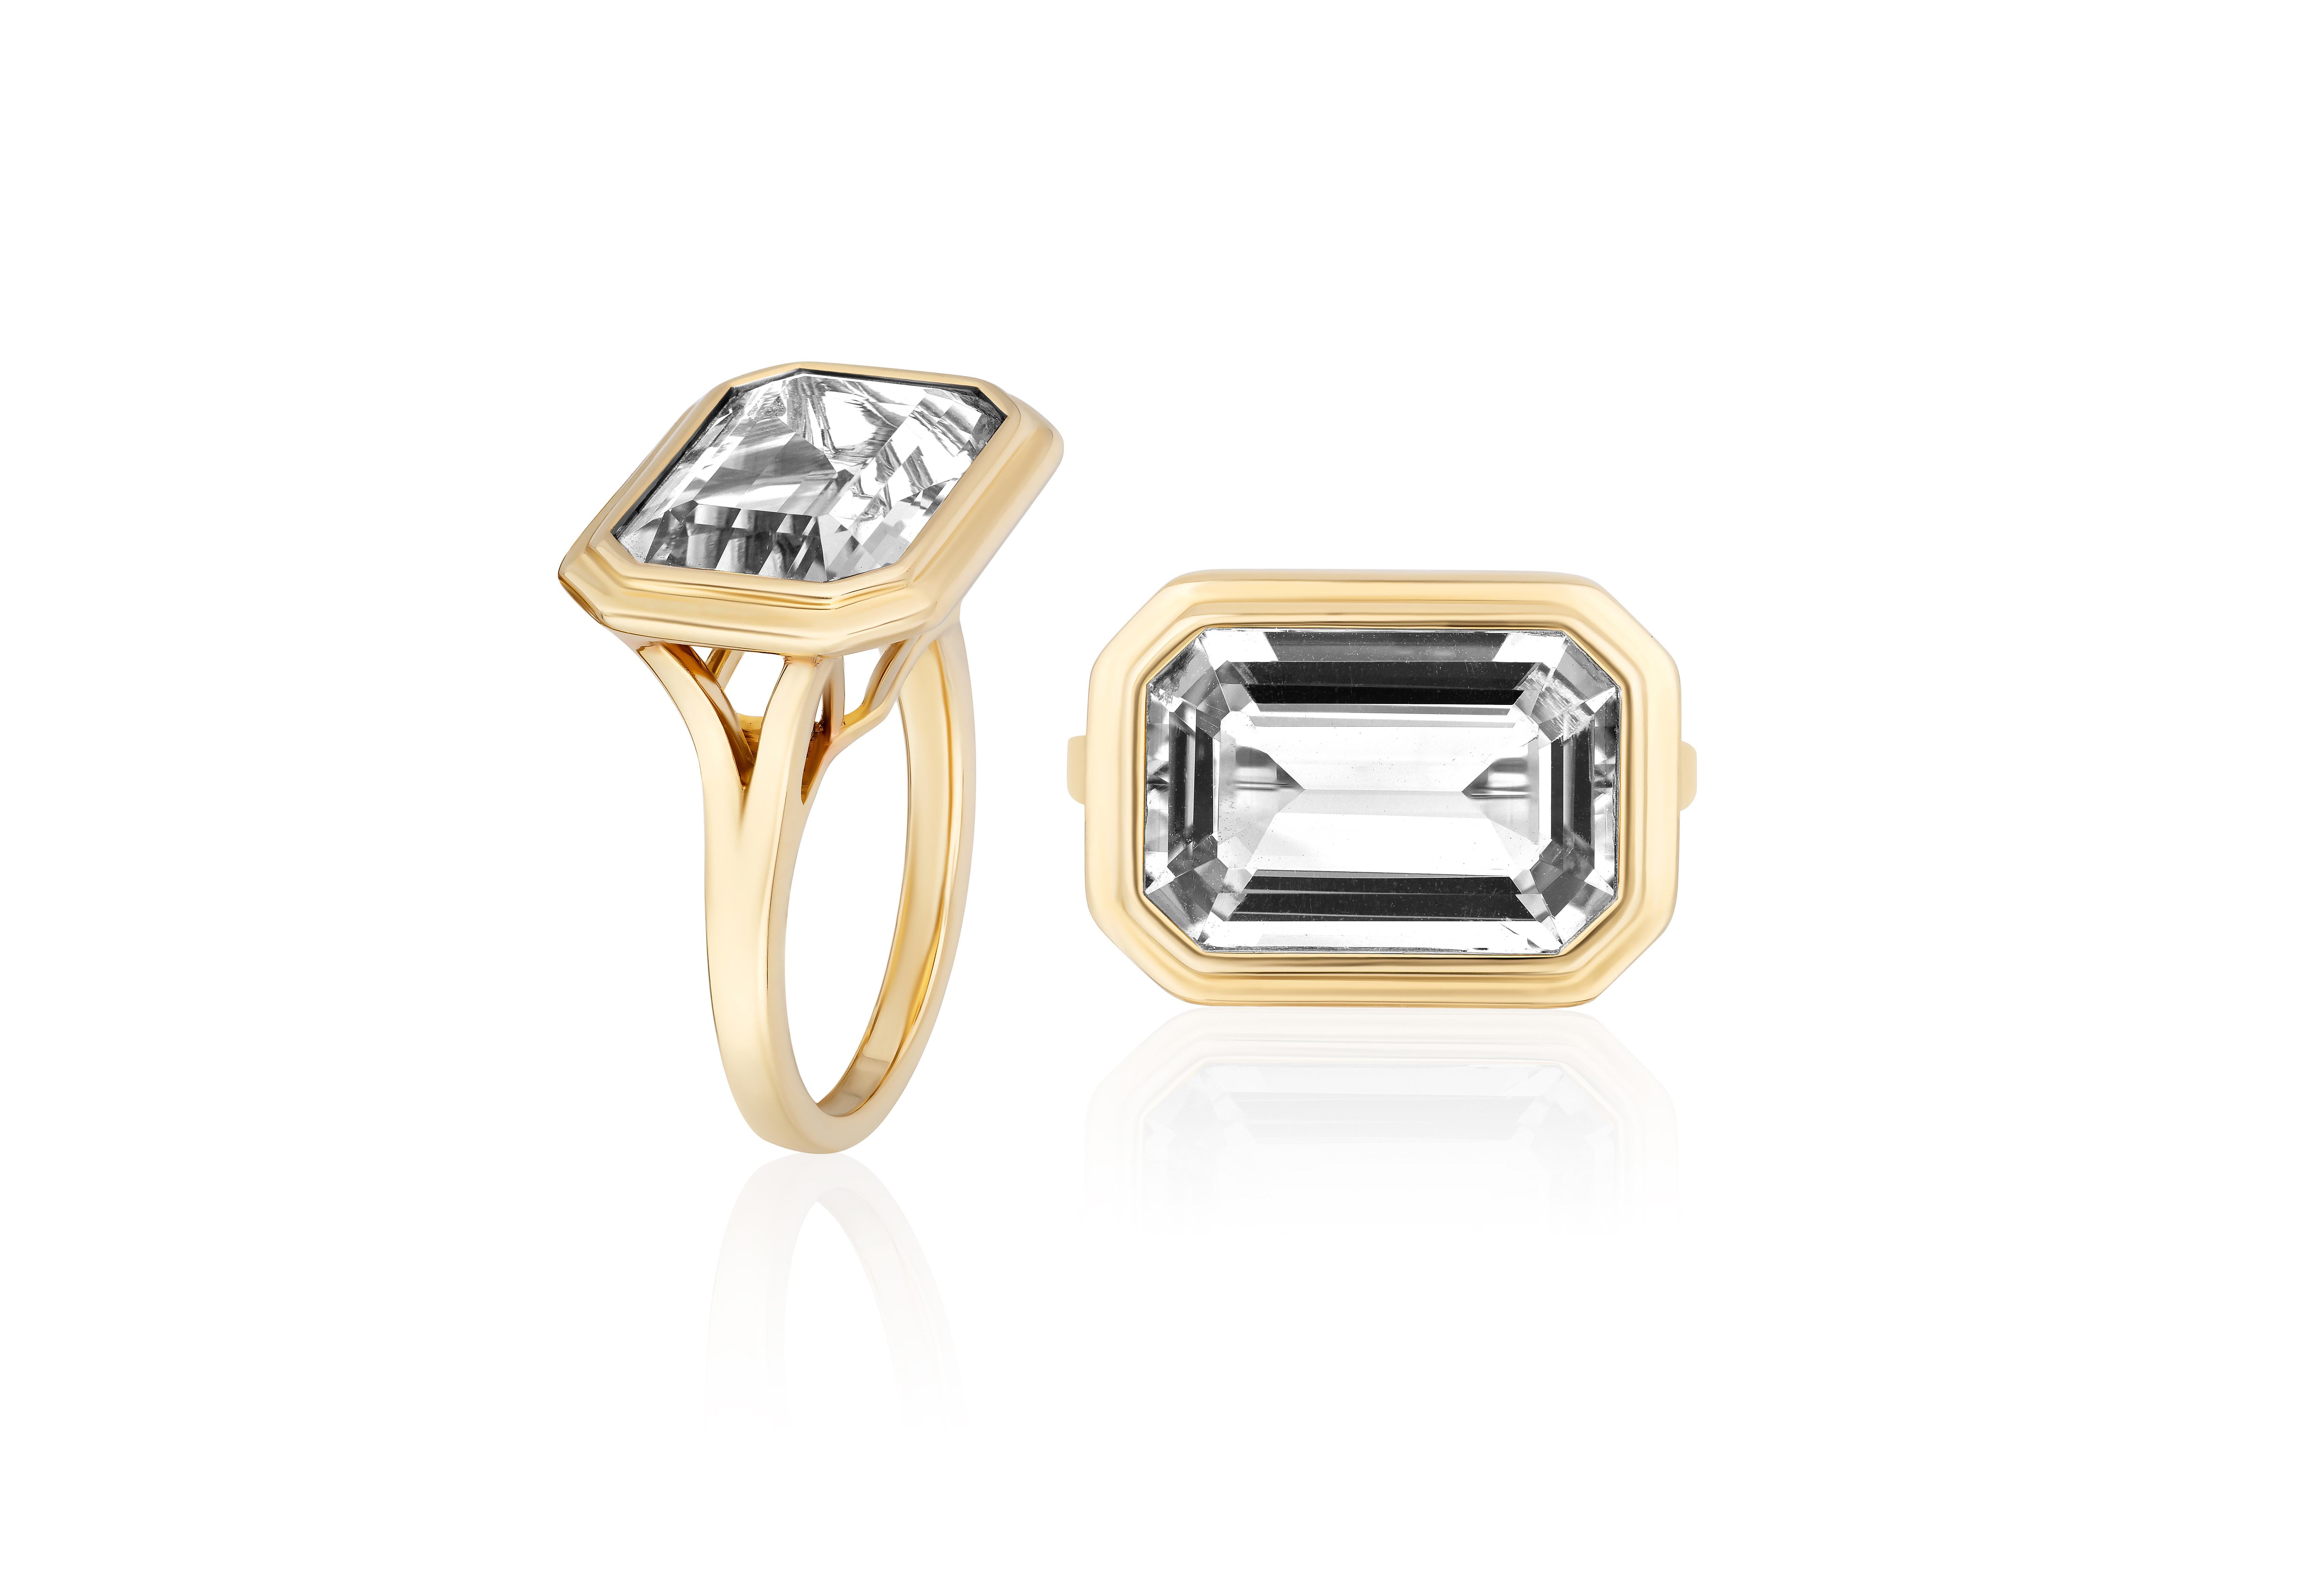 This East-West Rock Crystal Emerald Cut Bezel Set Ring in 18K Yellow Gold is a stunning piece from the 'Manhattan' Collection. Combining elegance with modernity, this ring showcases an emerald-cut rock crystal stone set in a bezel of lustrous 18K